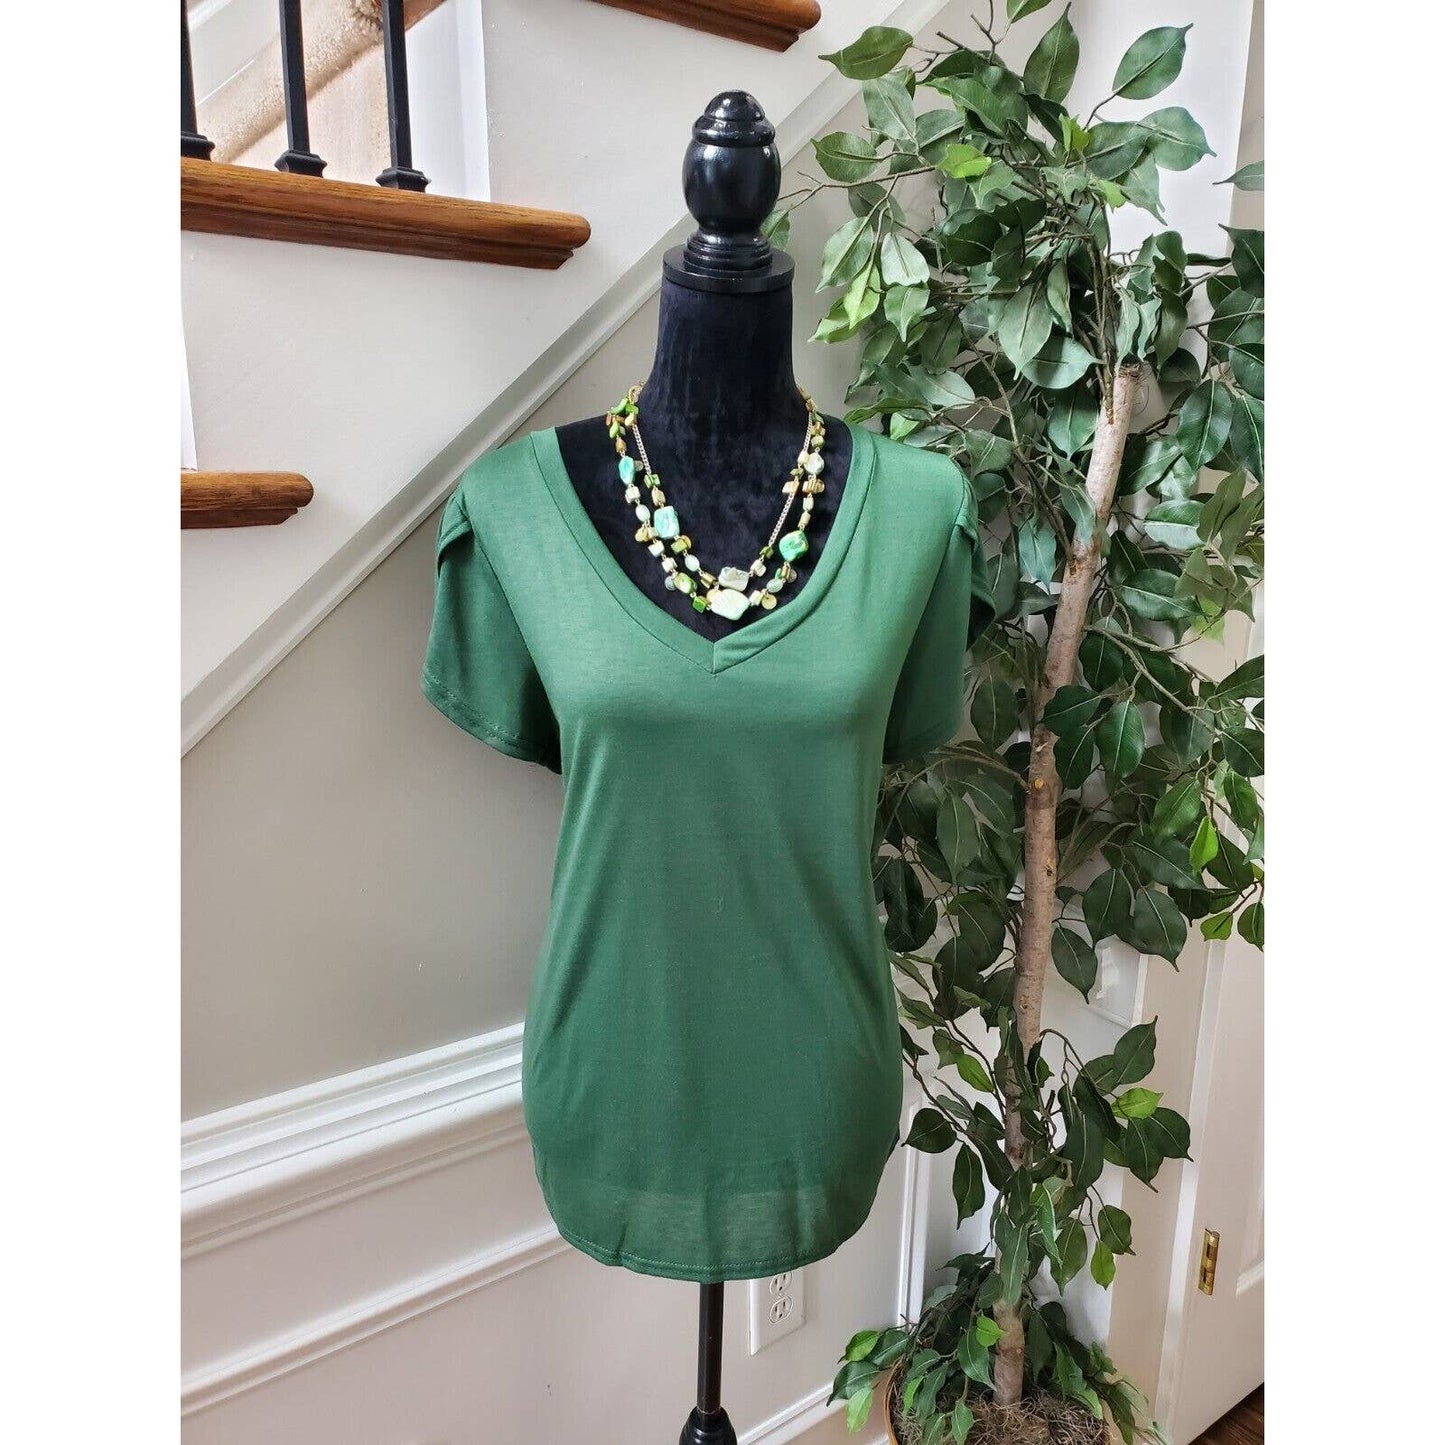 SHEIN Women's Green Polyester V-Neck Short Sleeve Casual Top Shirt Size Large